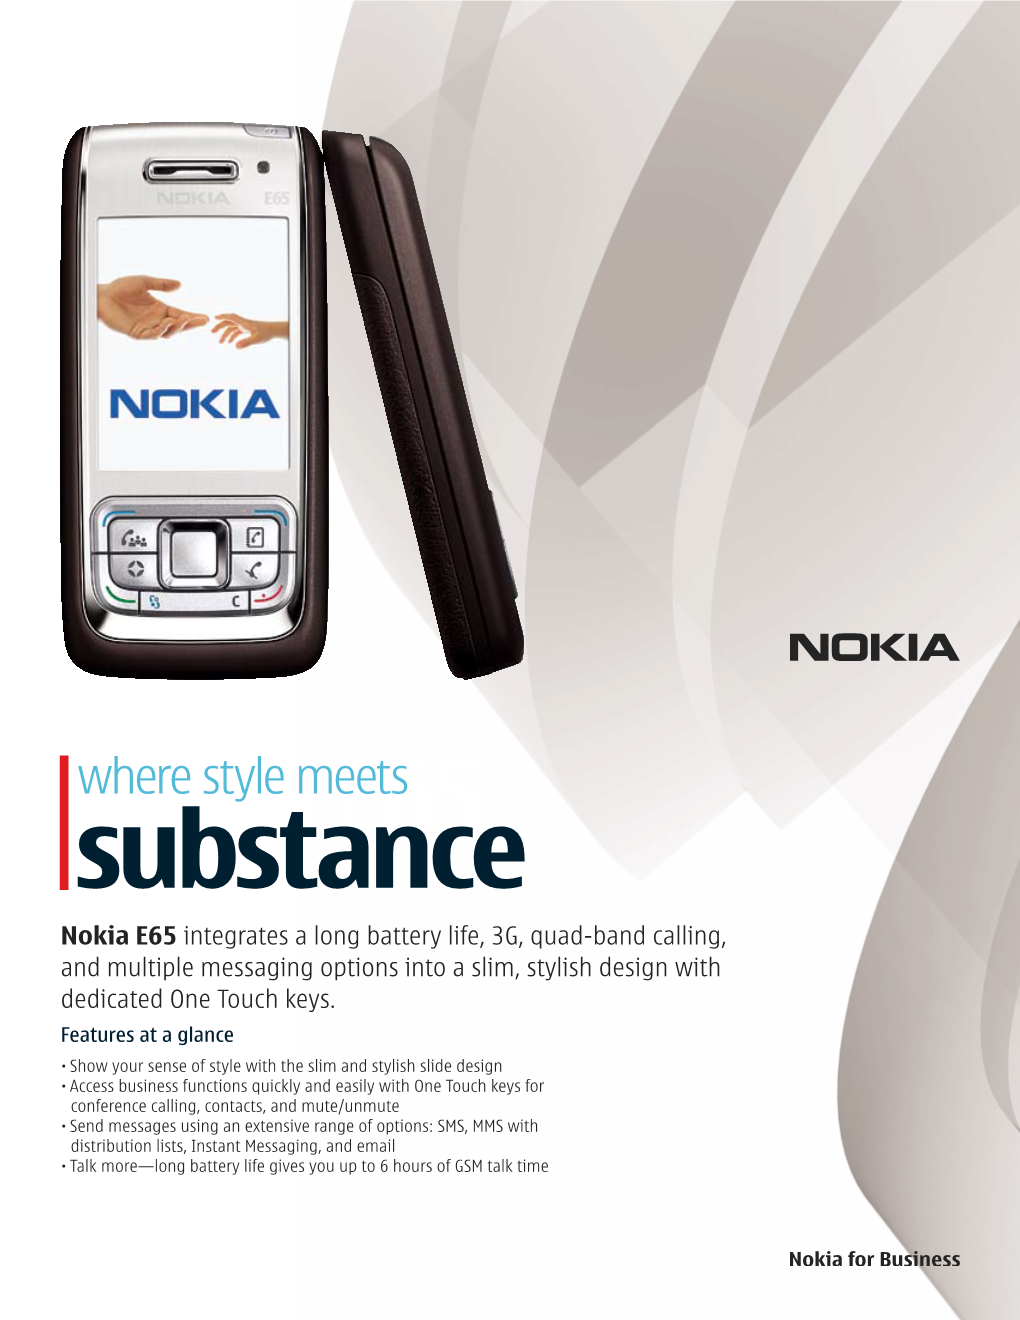 Substance Nokia E65 Integrates a Long Battery Life, 3G, Quad-Band Calling, and Multiple Messaging Options Into a Slim, Stylish Design with Dedicated One Touch Keys